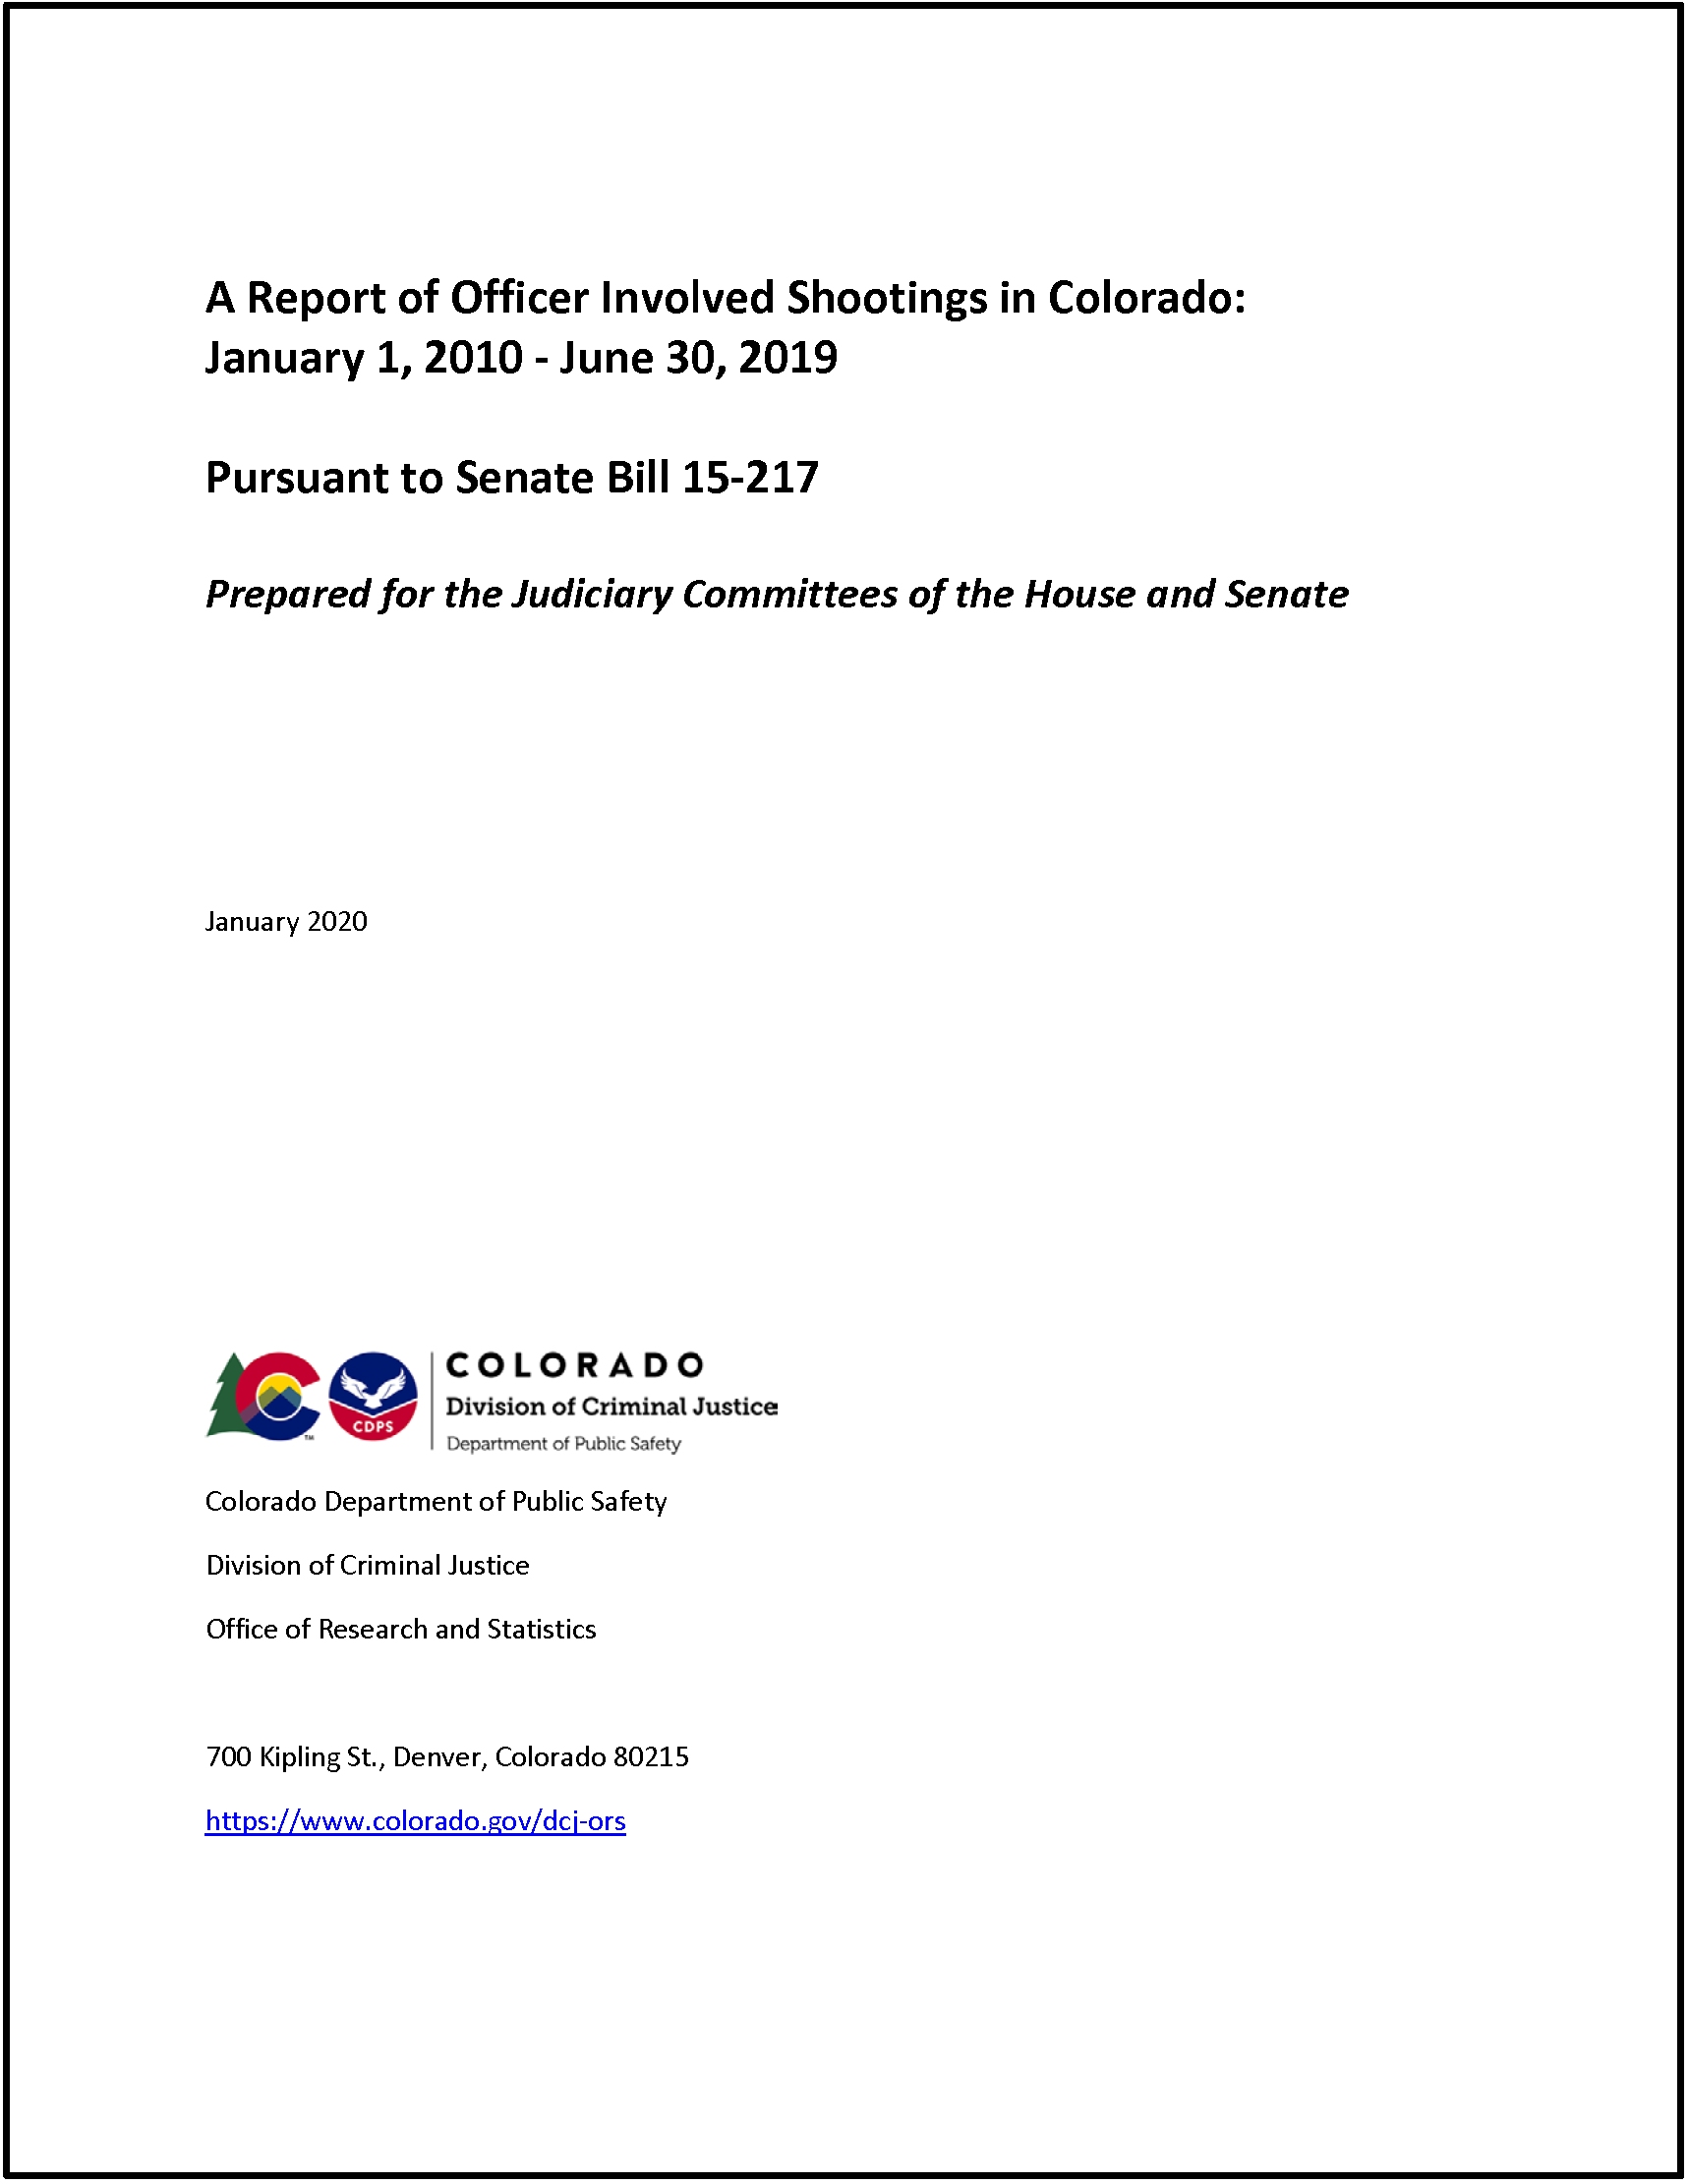 Officer-Involved Shootings in Colorado: 2010-2019